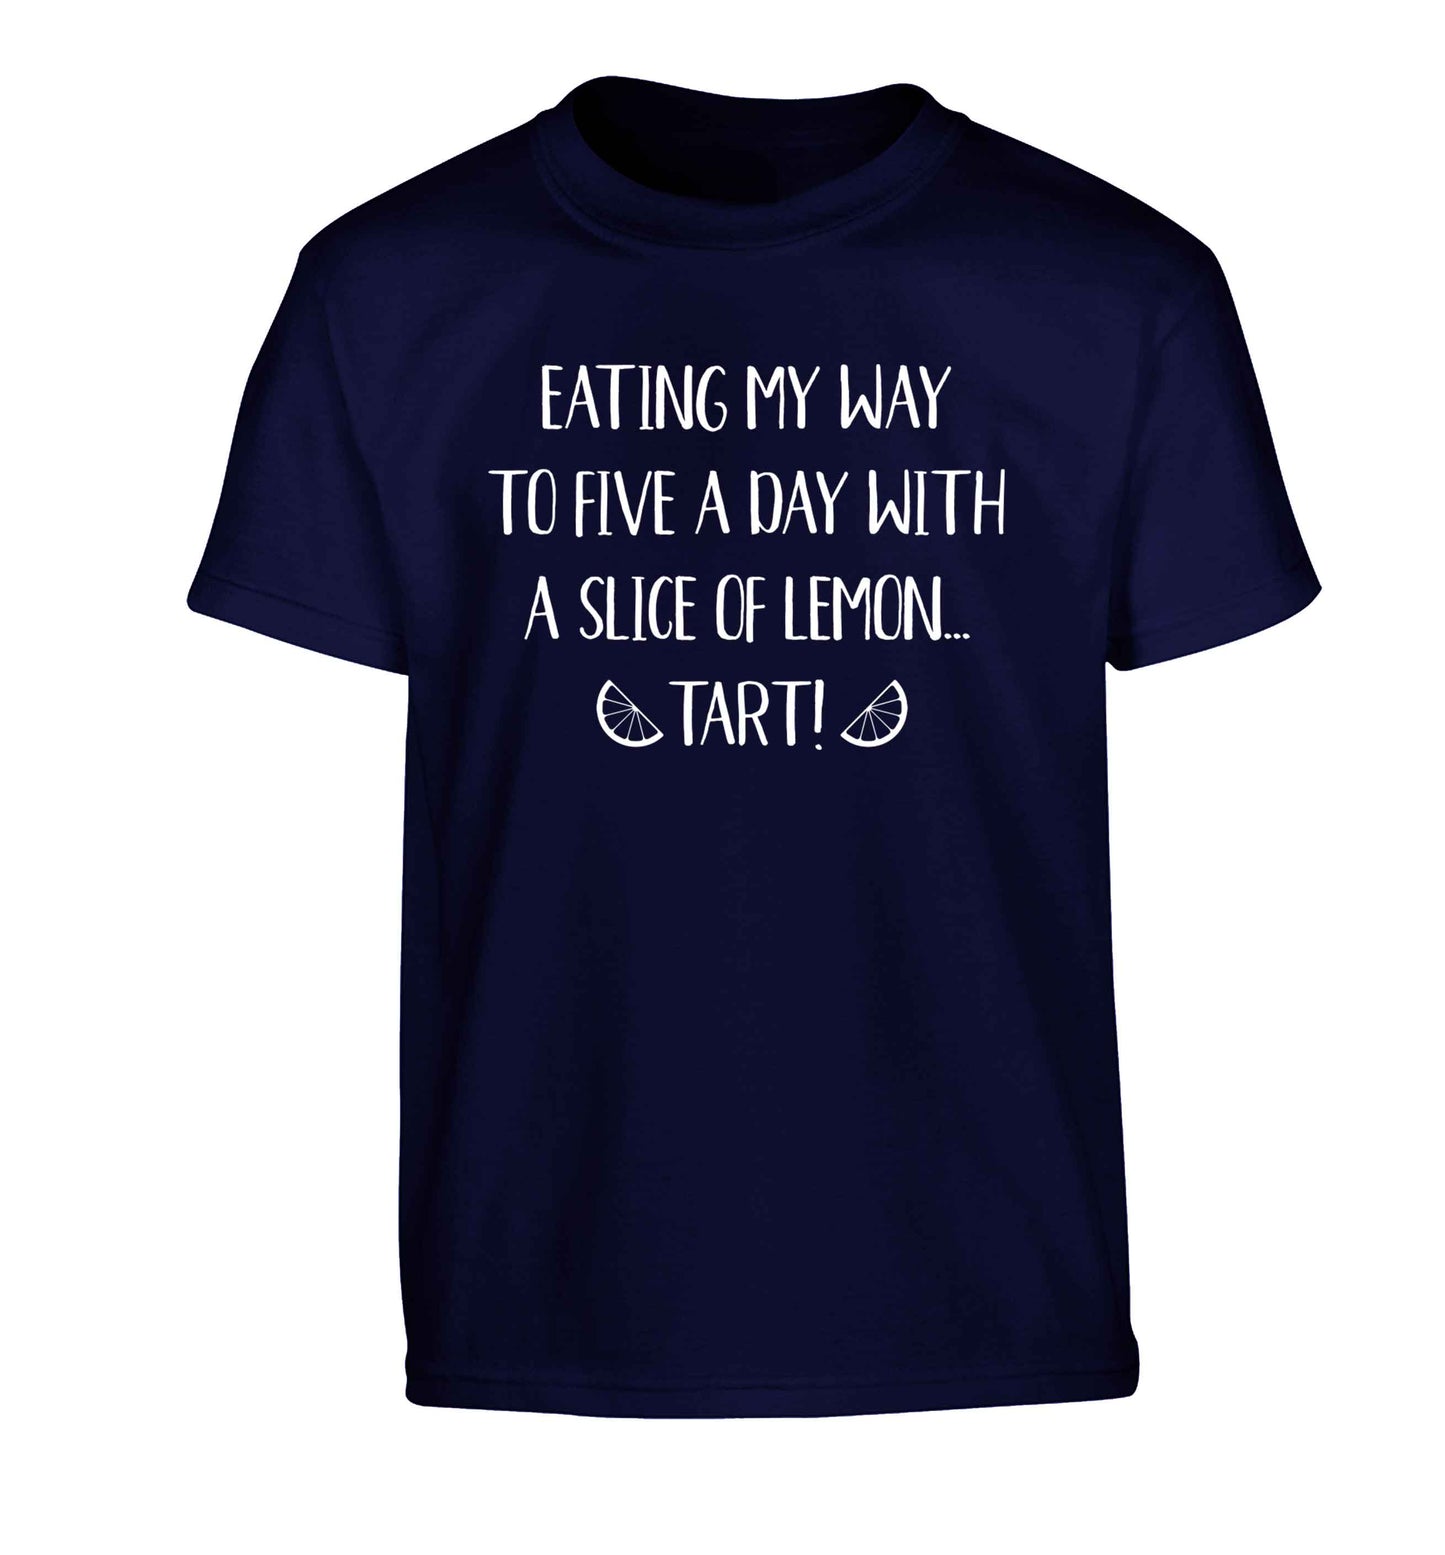 Eating my way to five a day with a slice of lemon tart Children's navy Tshirt 12-13 Years